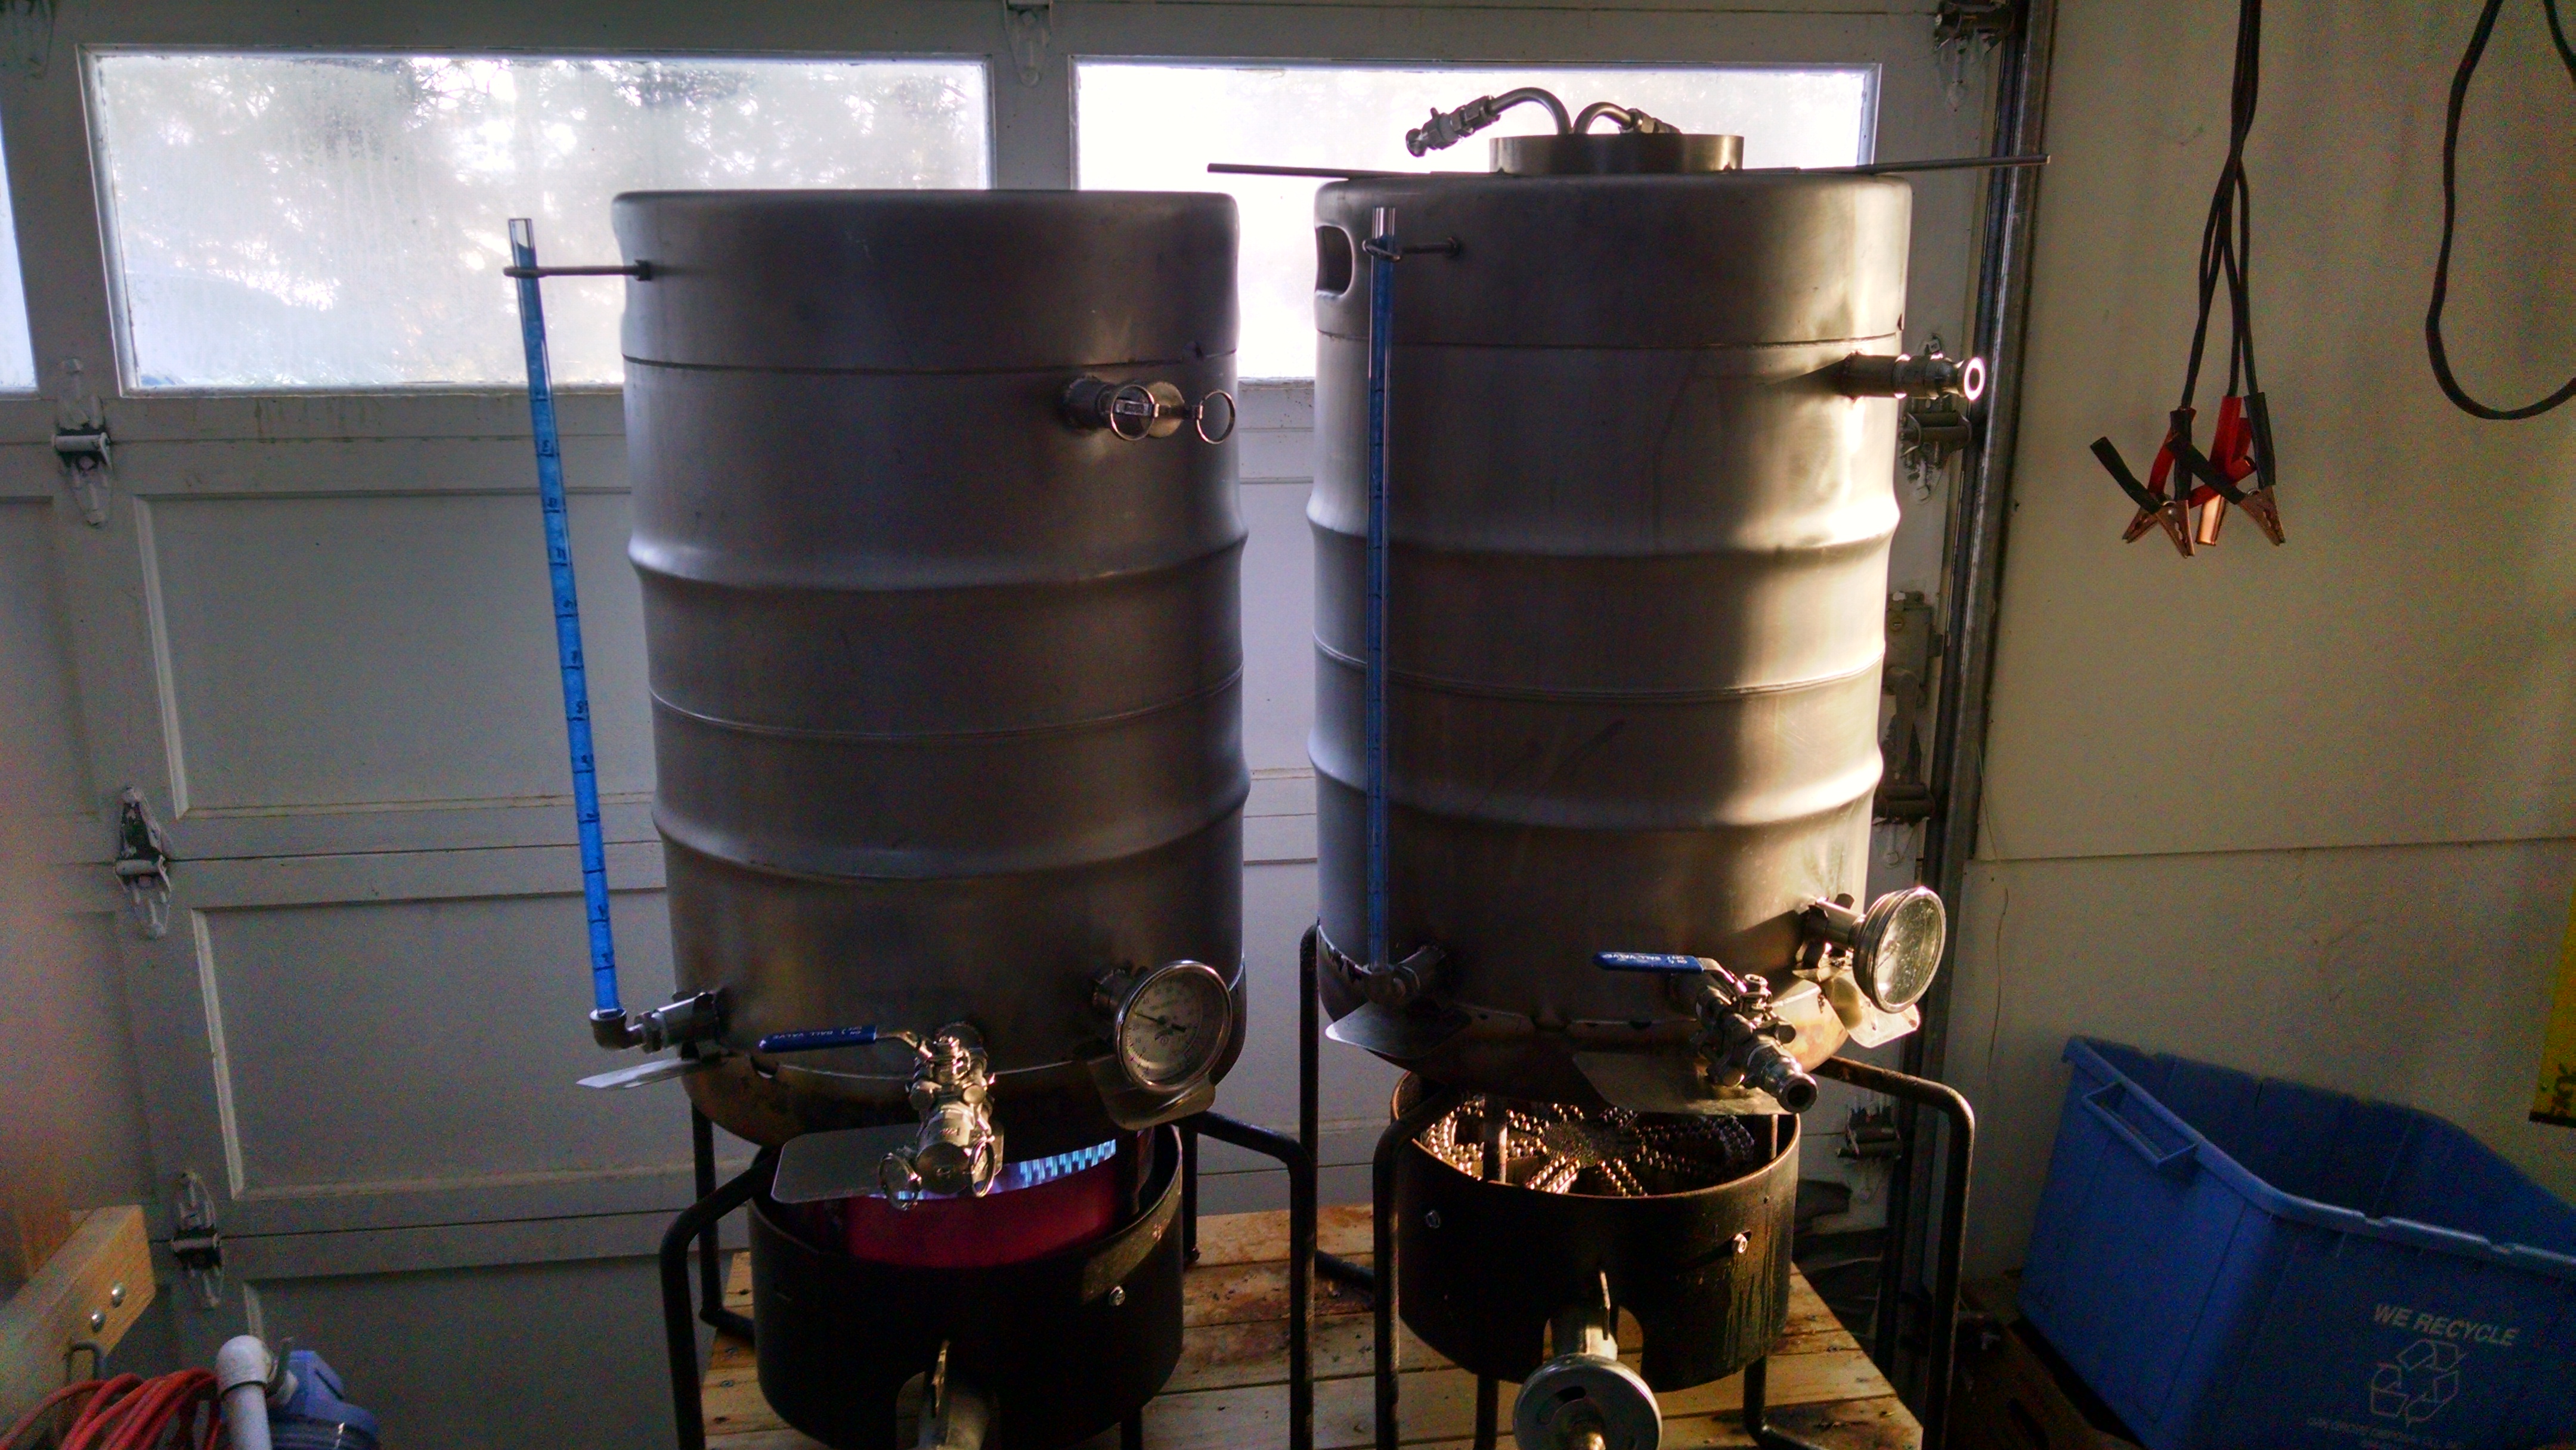 The home brewery has an application in birch syrup production